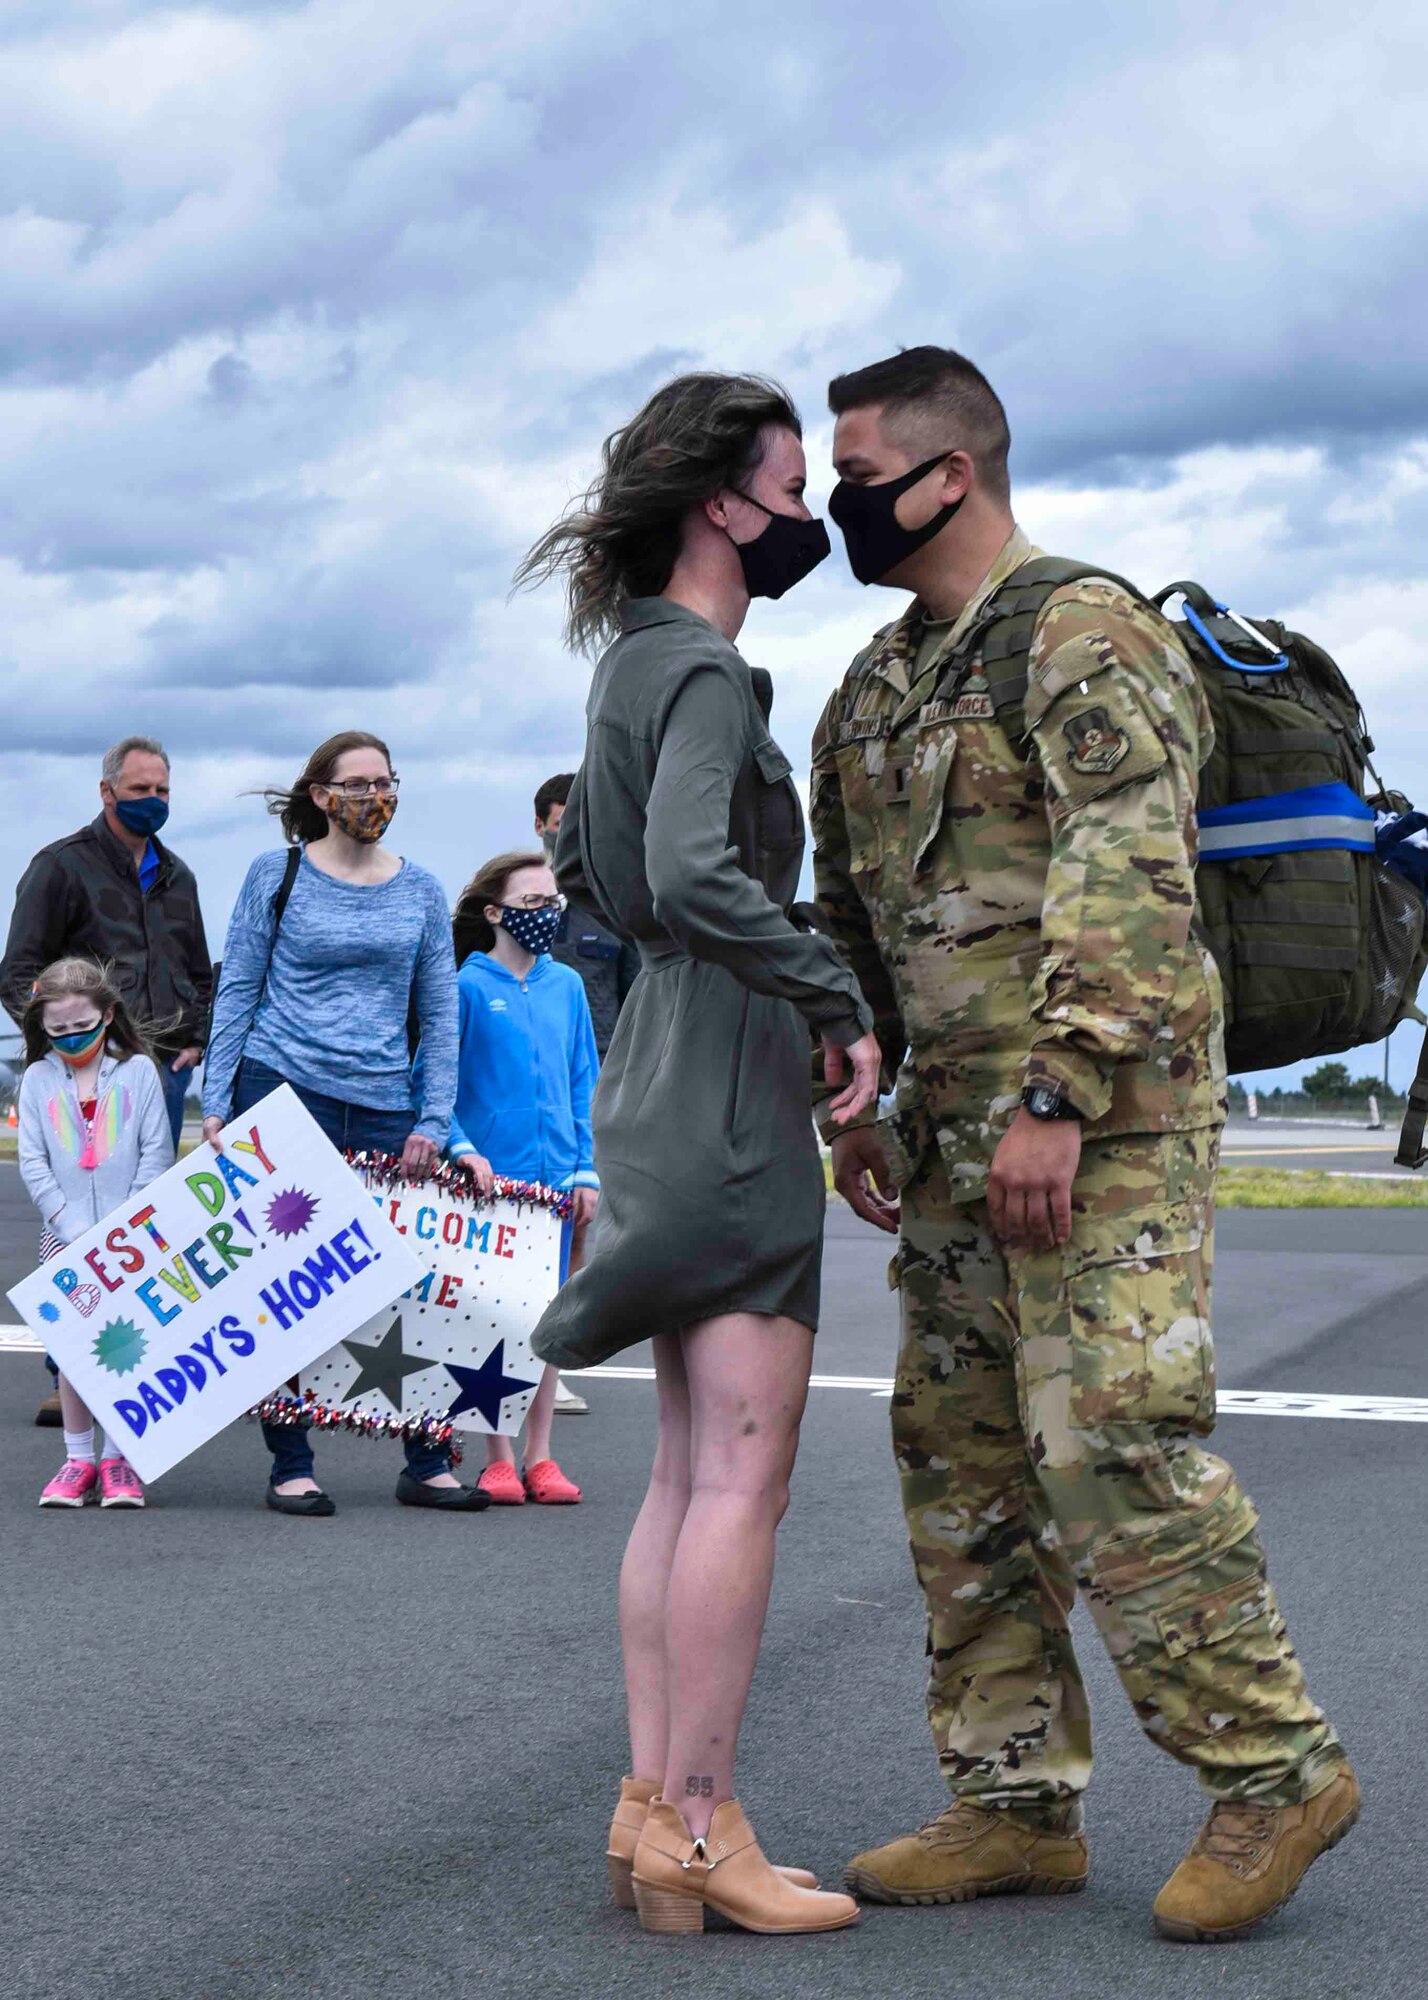 A 93rd Air Refueling Squadron member arrives from deployment and greets his loved one on Fairchild Air Force Base, Washington, July 1, 2020. Seventy-six members of the 93rd ARS deployed for seven months in support of Operation Inherent Resolve. (U.S. Air Force photo by Airman 1st Class Kiaundra Miller)